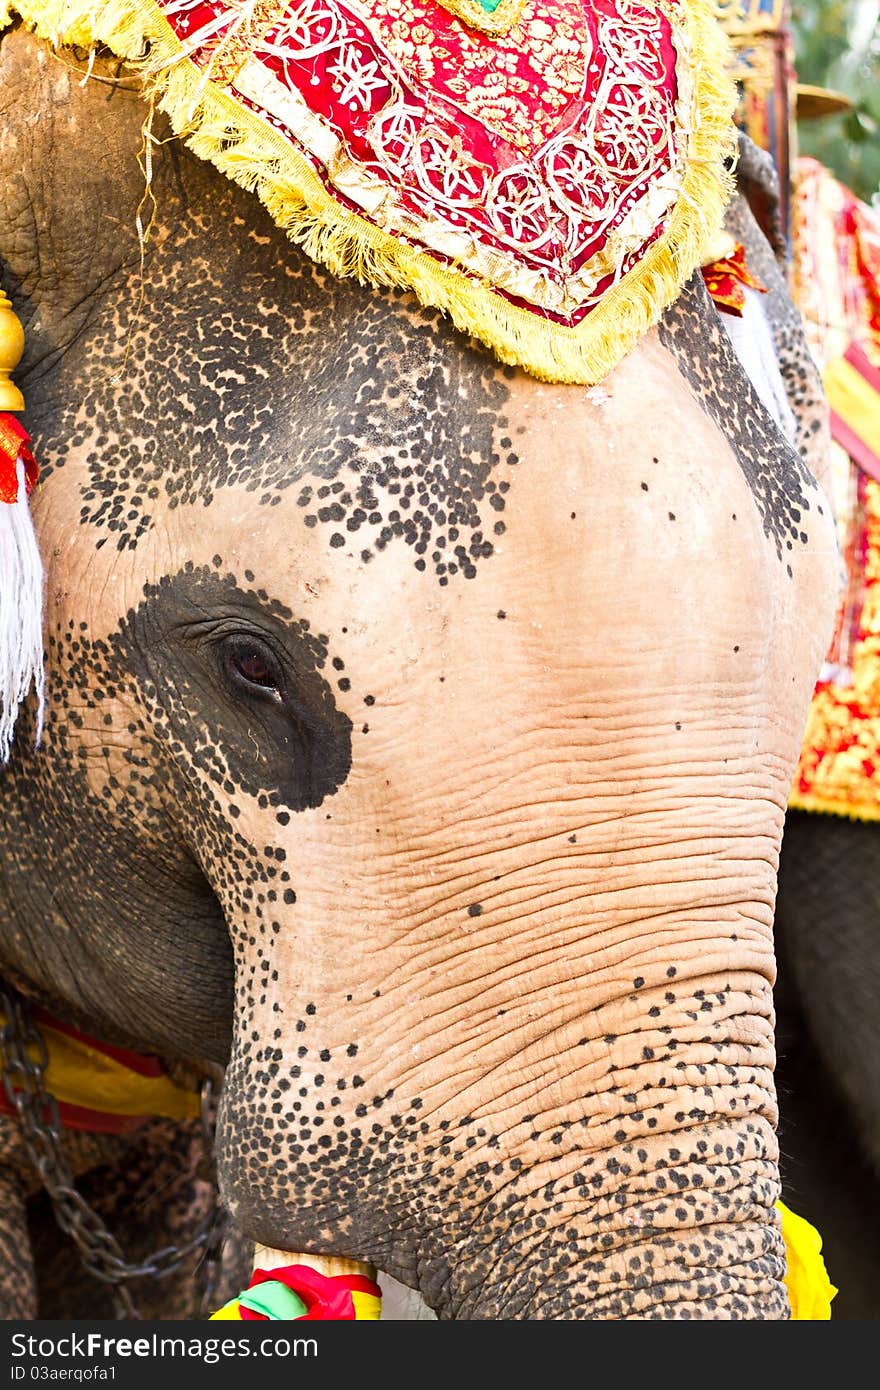 Elephant face close up in lopburi of Thailand